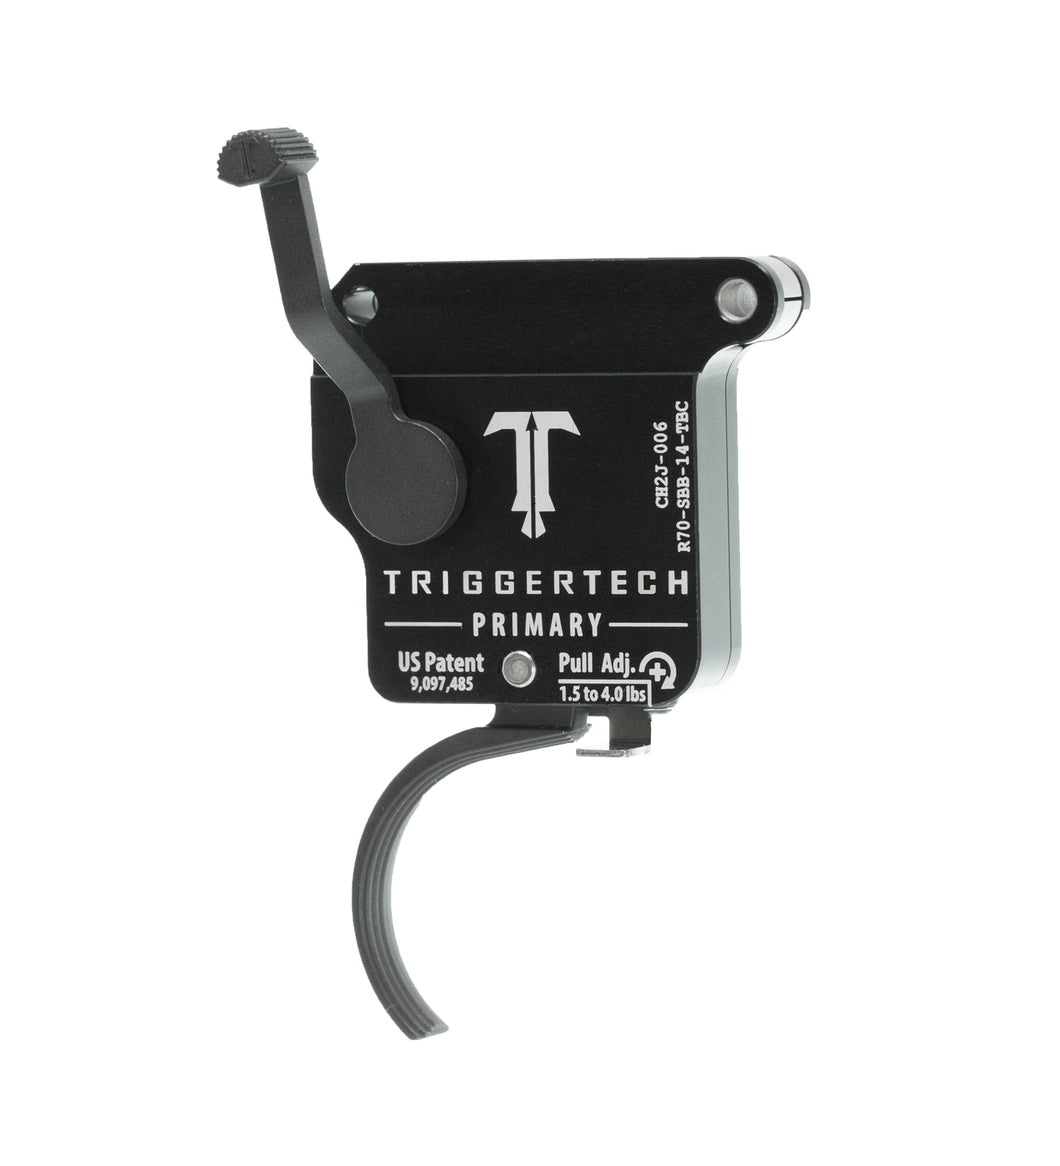 Triggertech Primary PVD Black curved